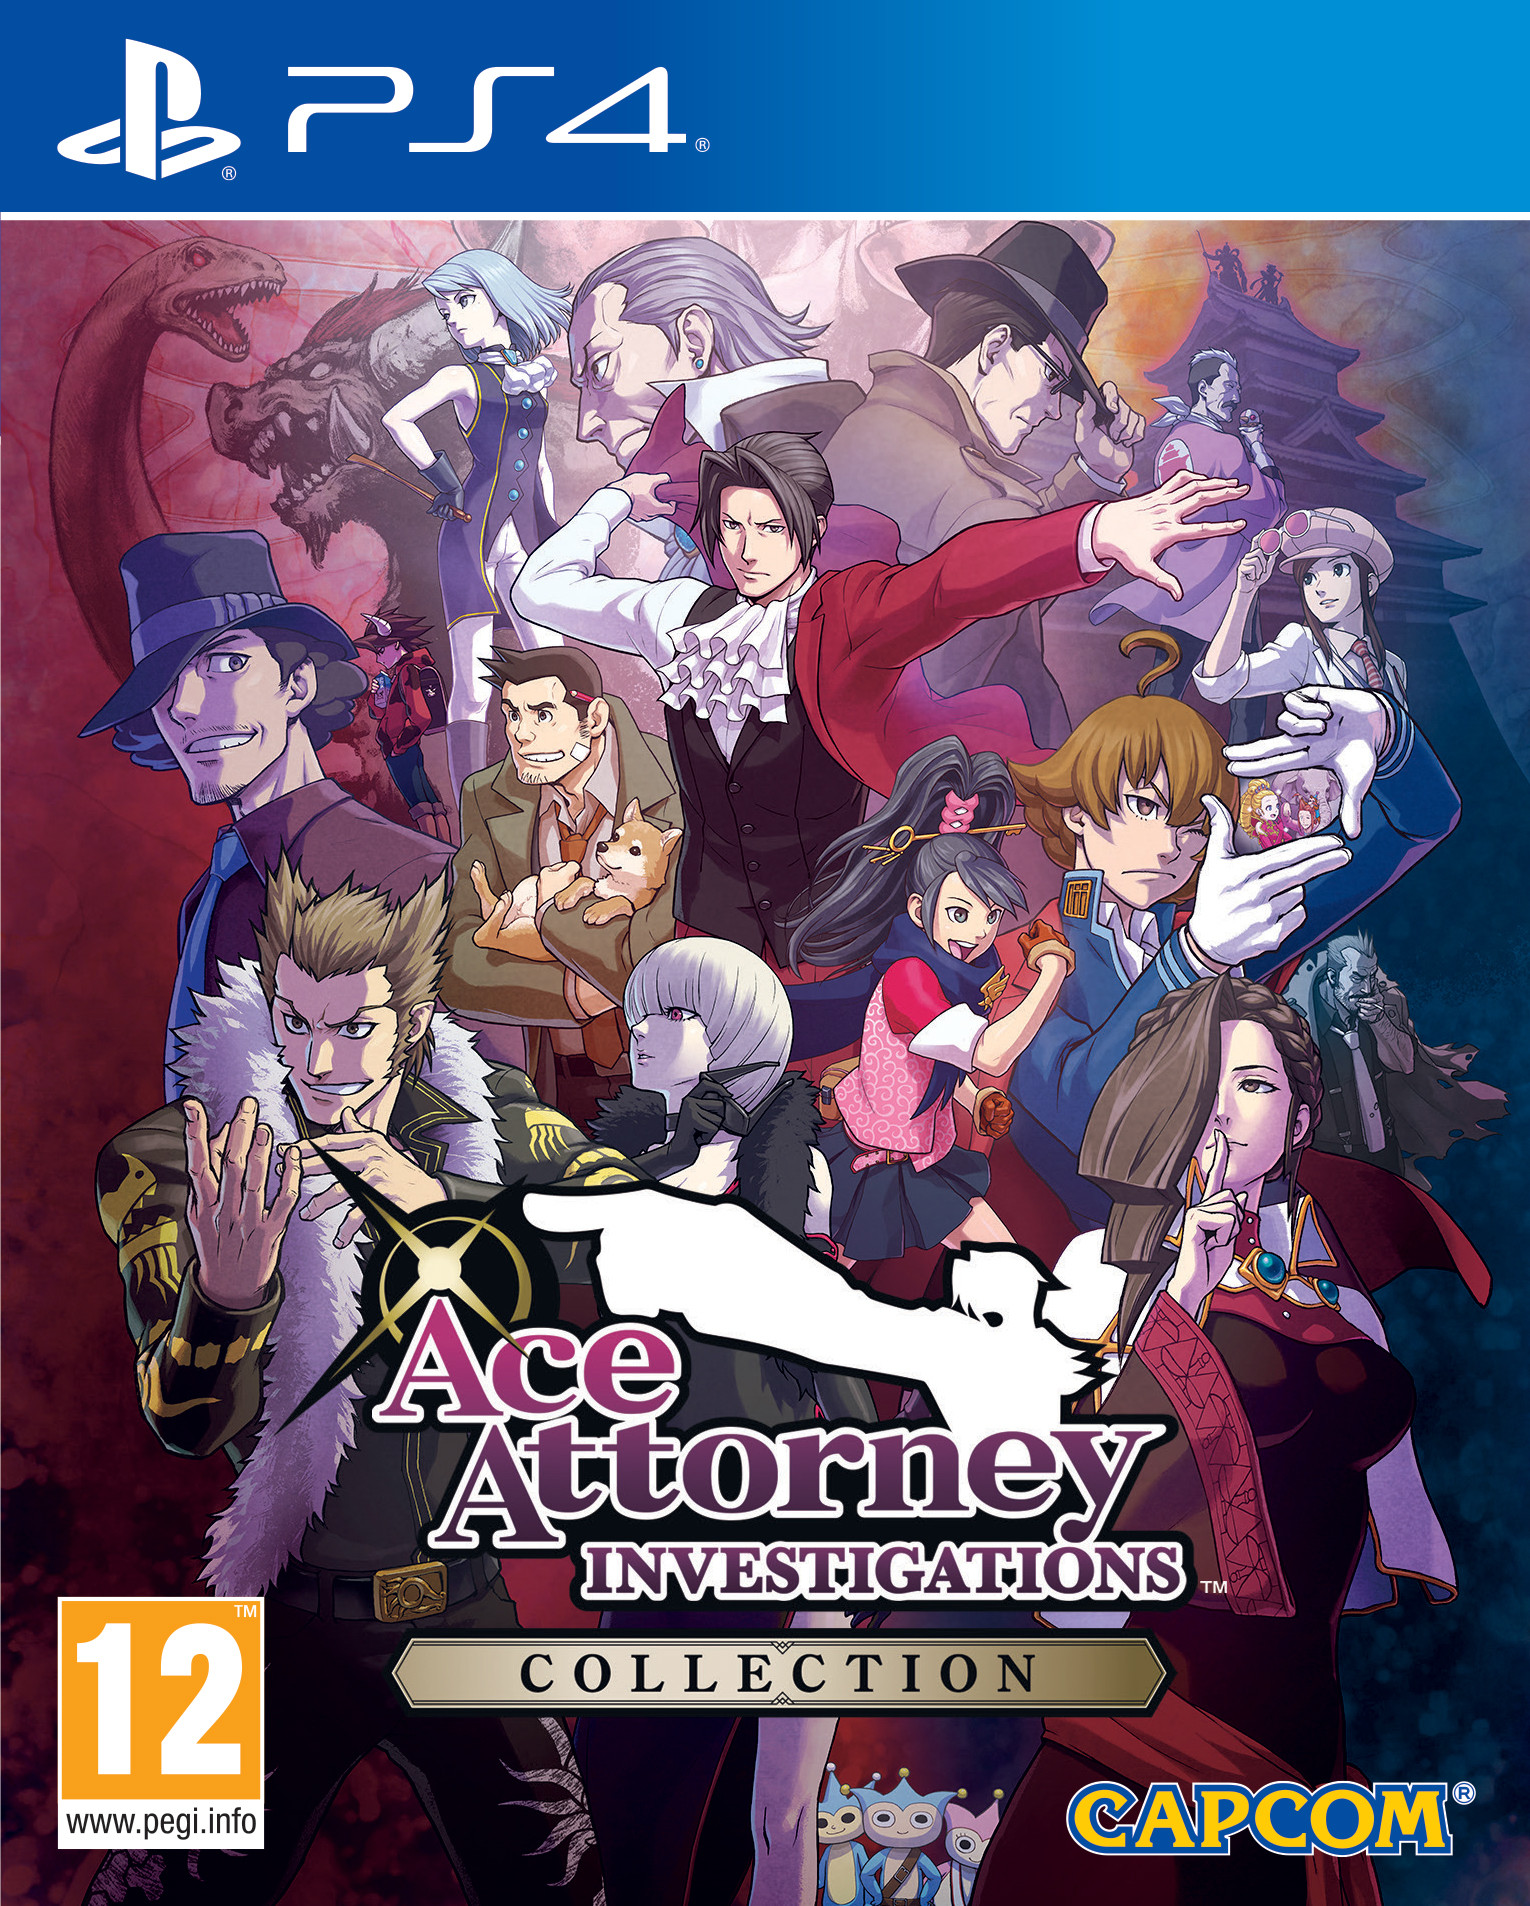 Capcom Ace Attorney Investigations Collection